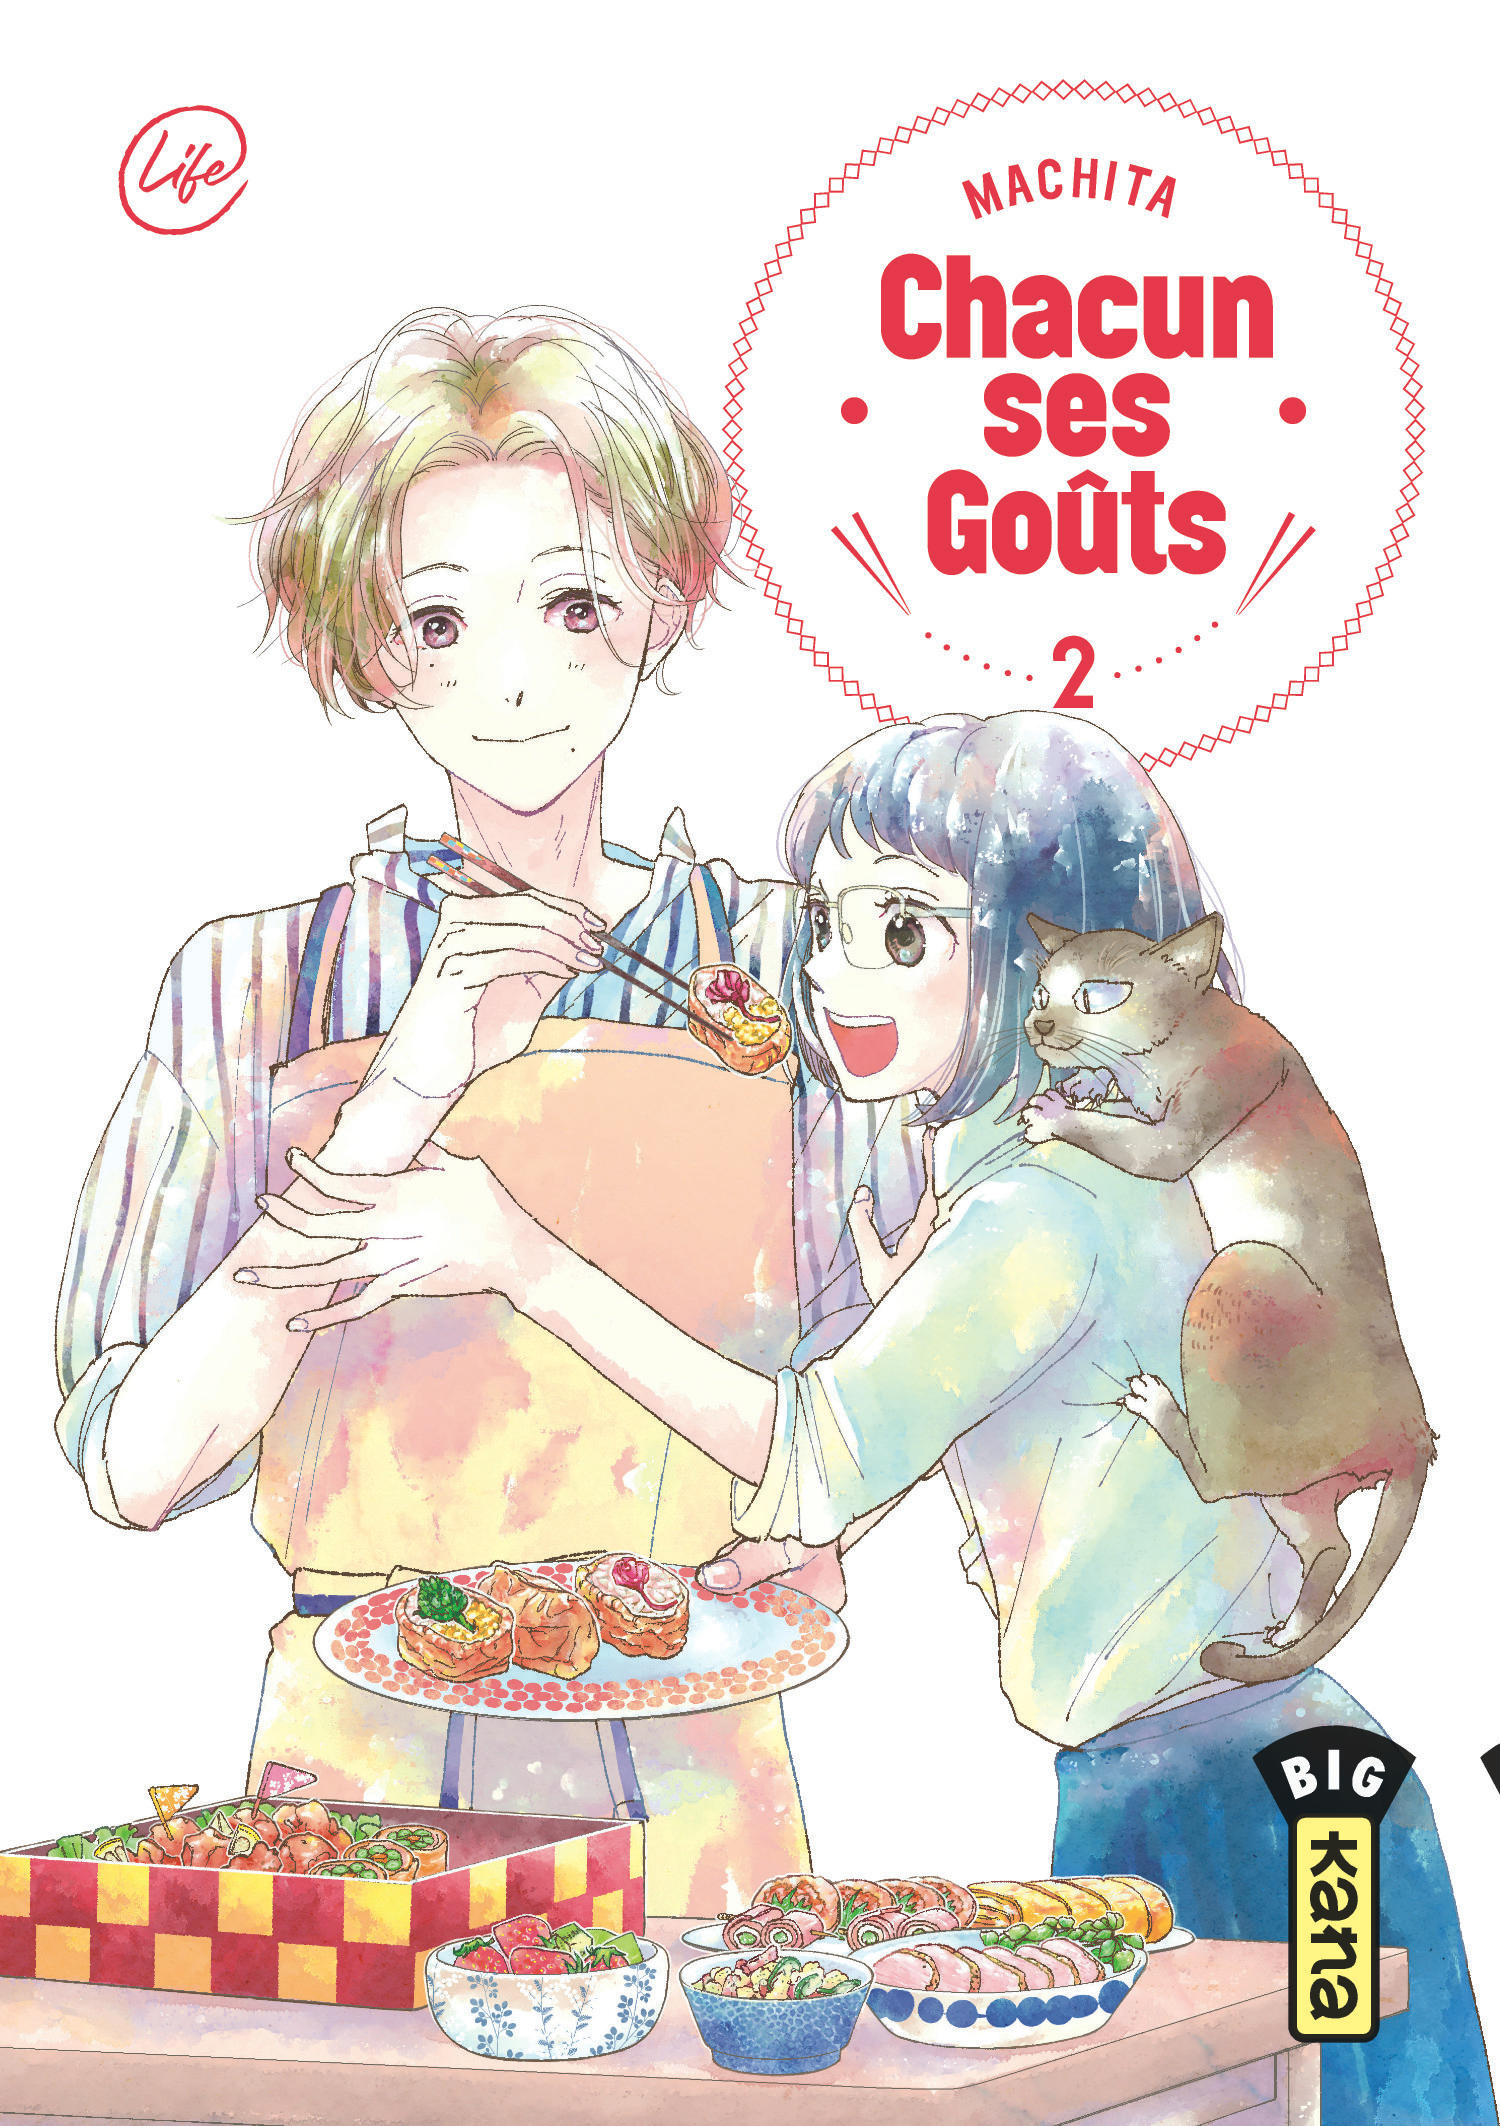 Chacun ses goûts – Tome 2 - couv